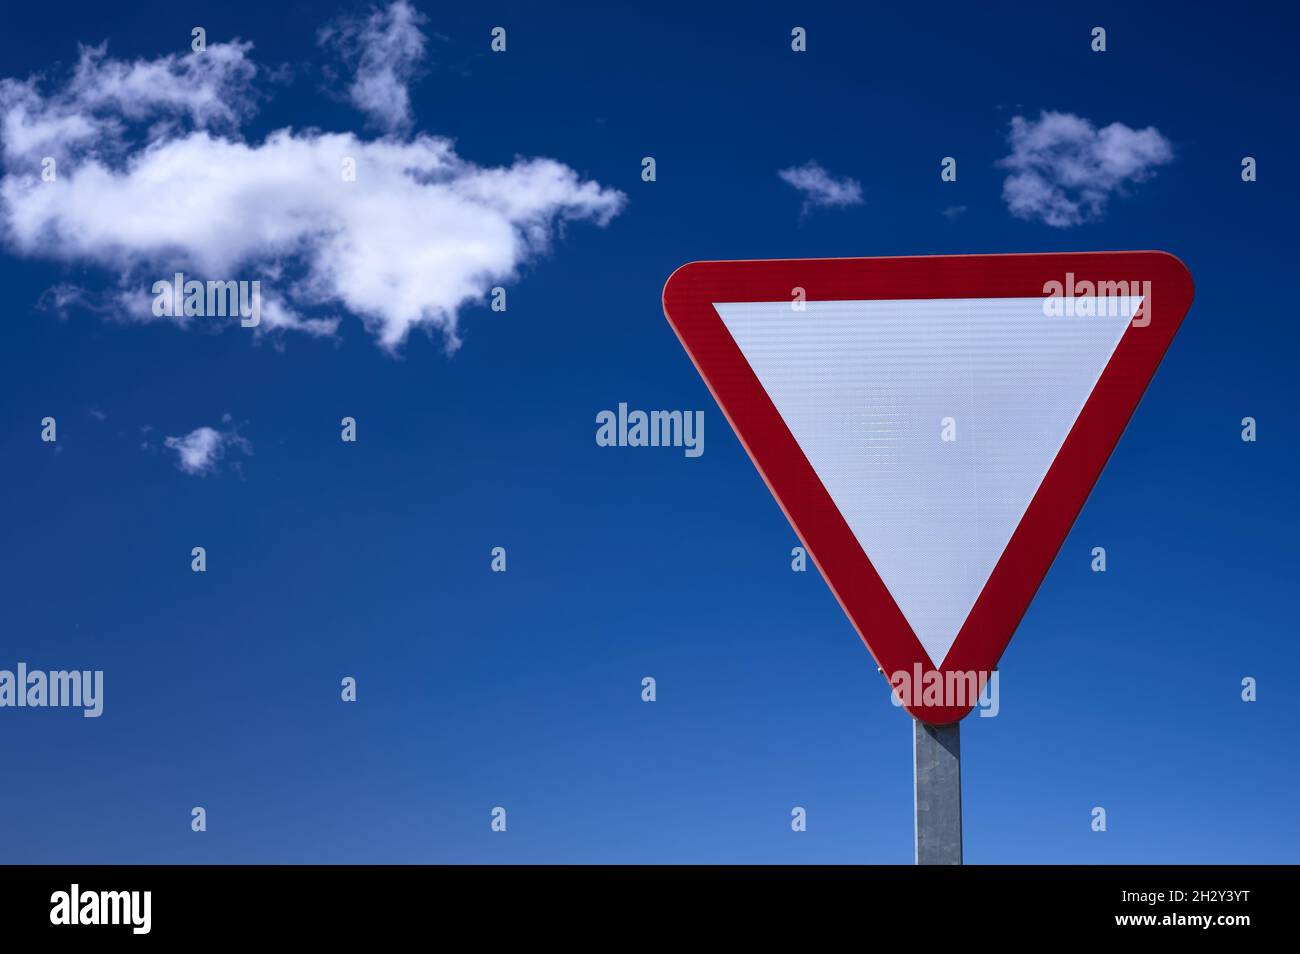 detail of a give way traffic sign over a blue and cloudy sky Stock Photo